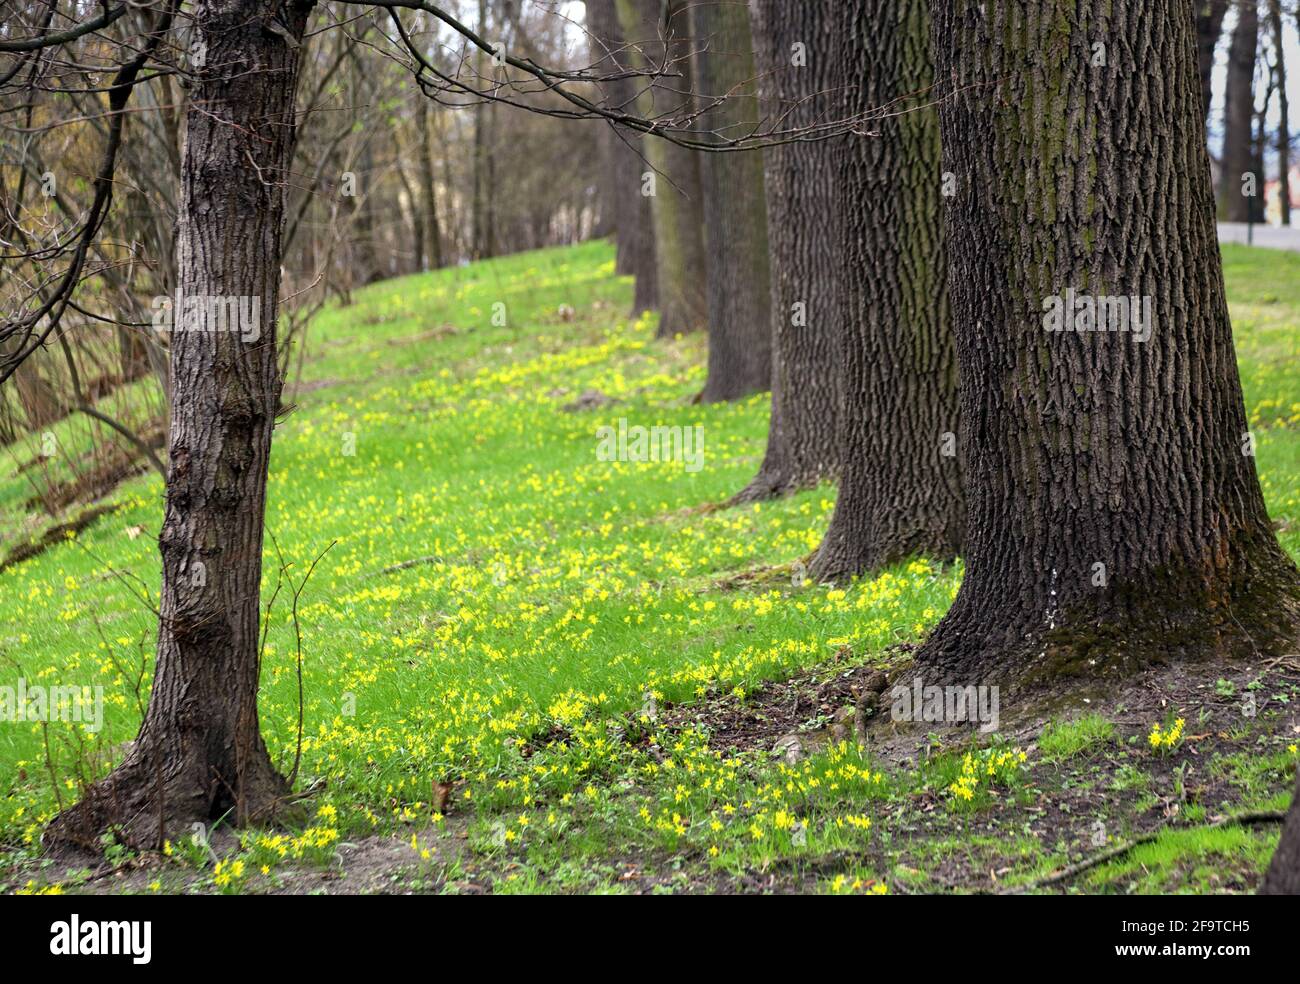 Cracow. Krakow. Poland. Yellow star-of-Bethlehem (Gagea lutea) flowers blooming in the lawn by old trees alley. Selective focus. Stock Photo